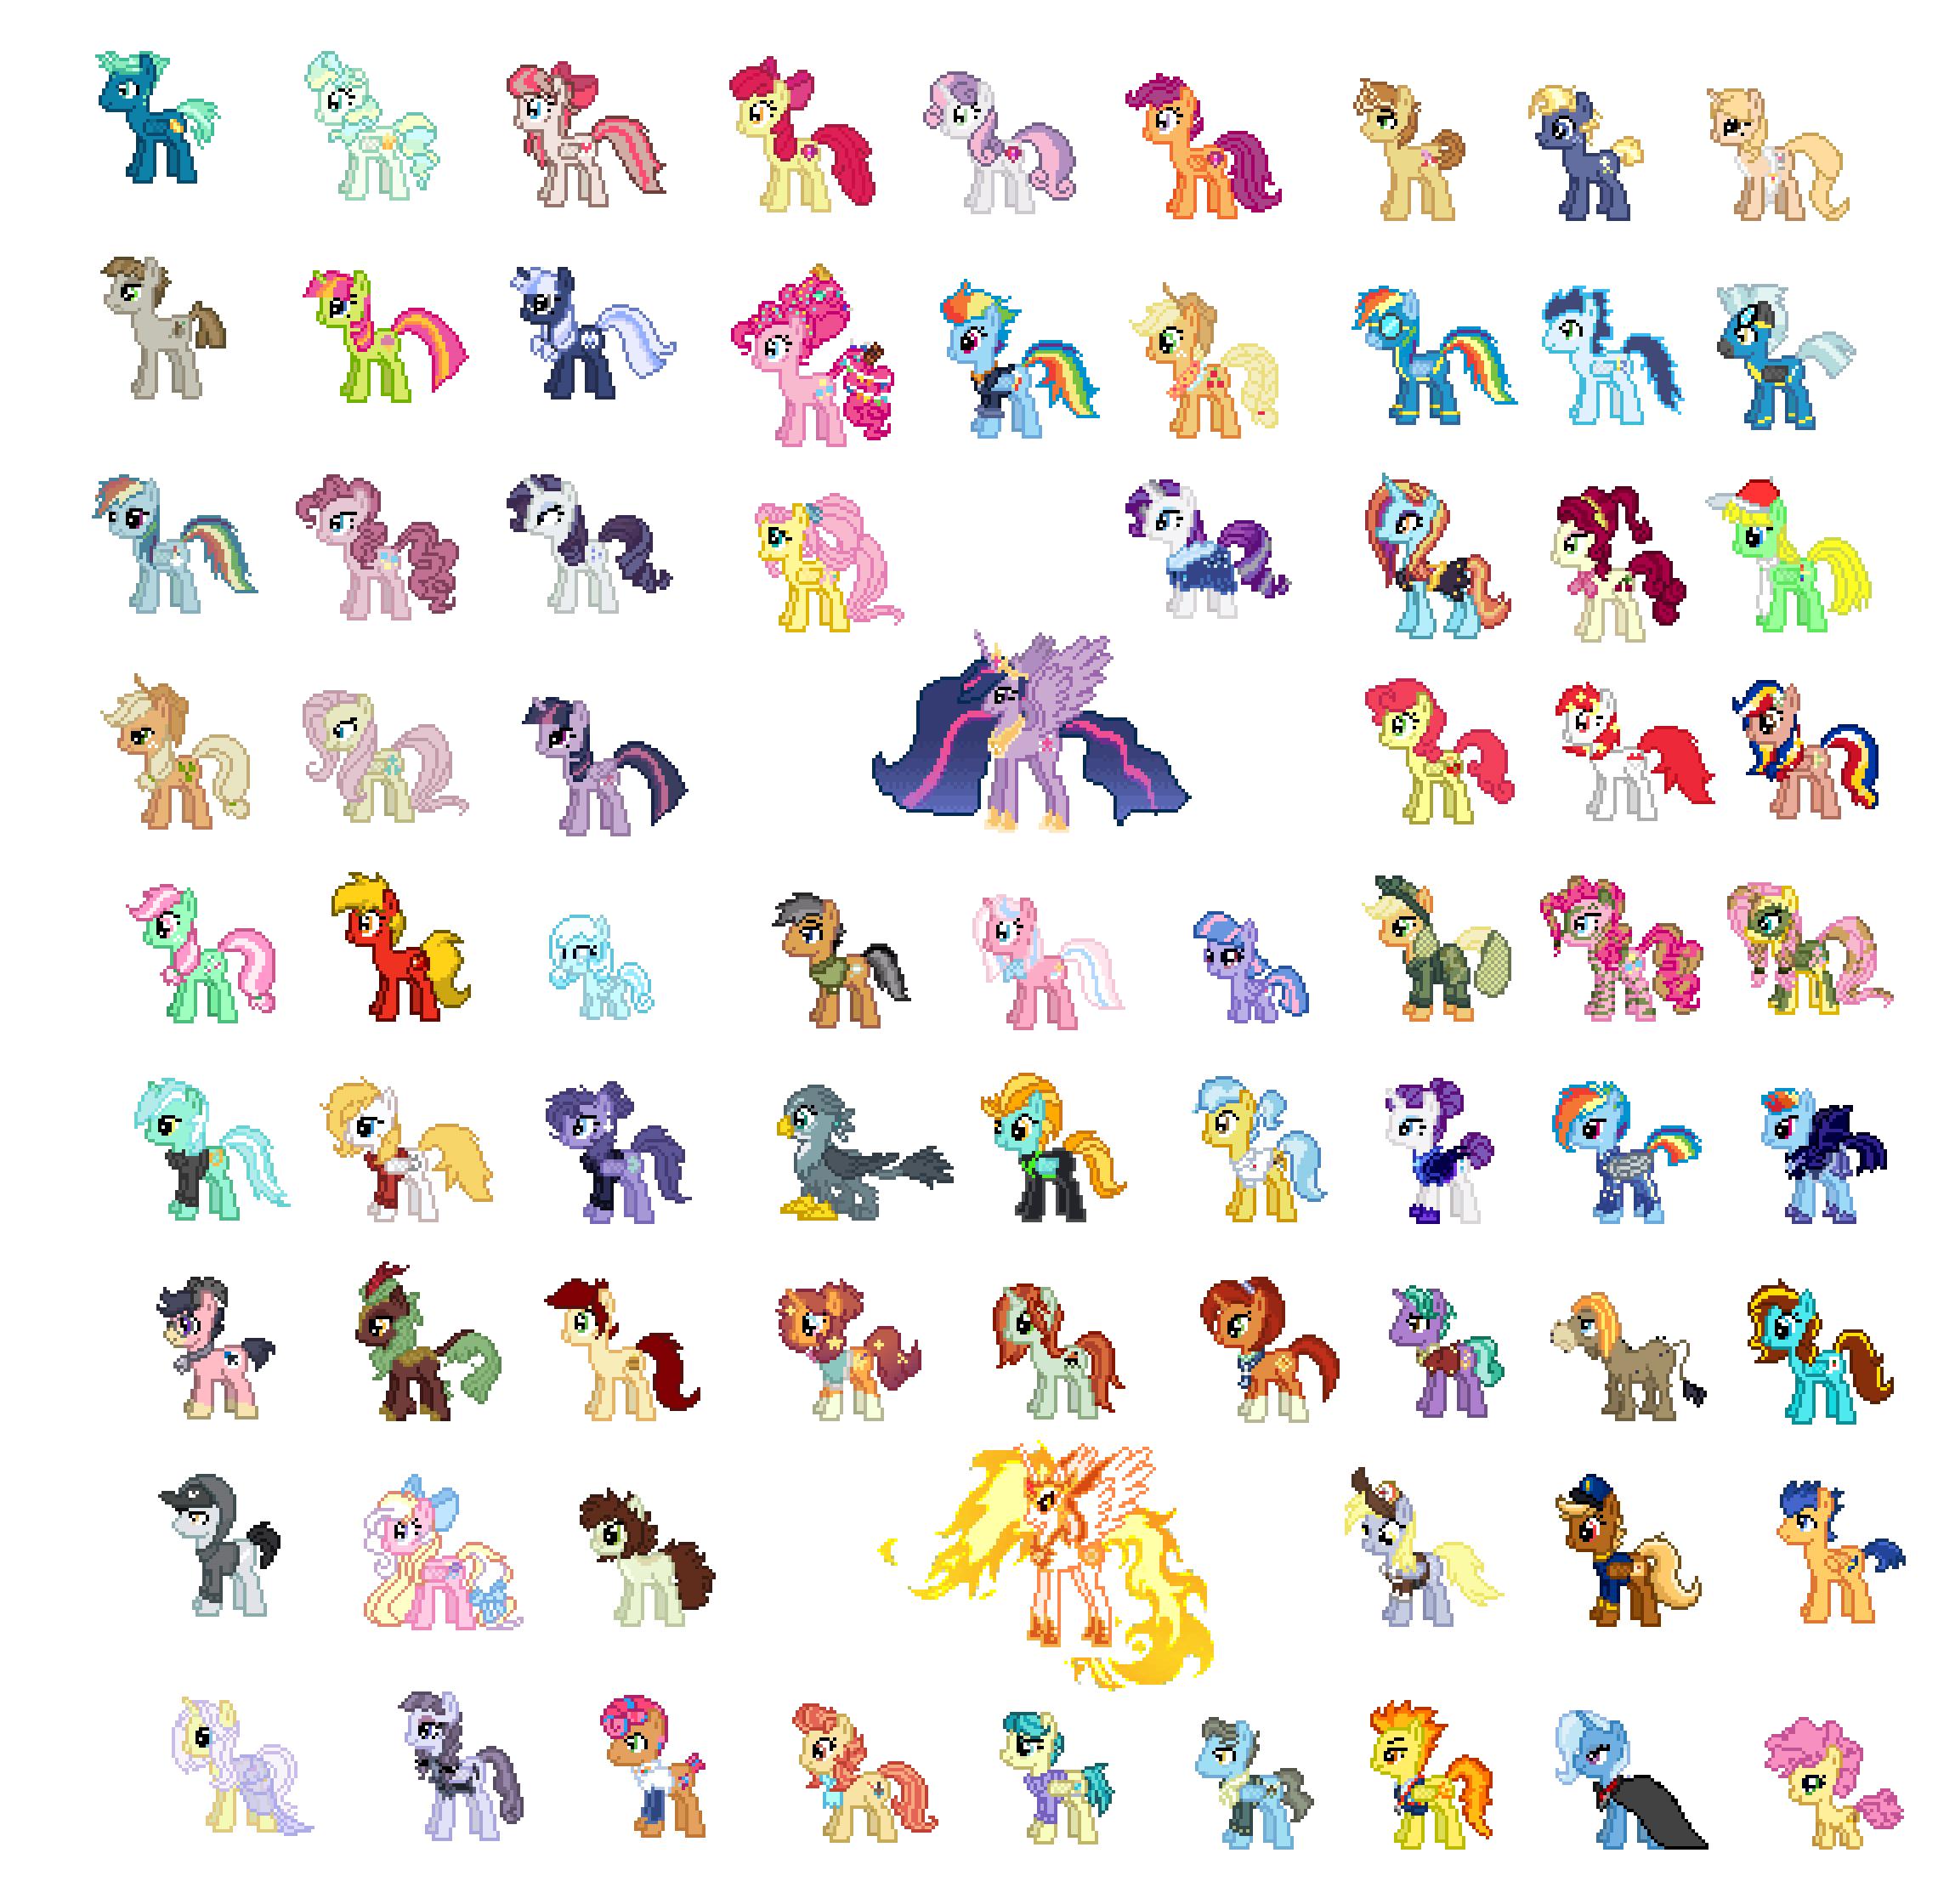 Can You Name 100 My Little Pony Characters?